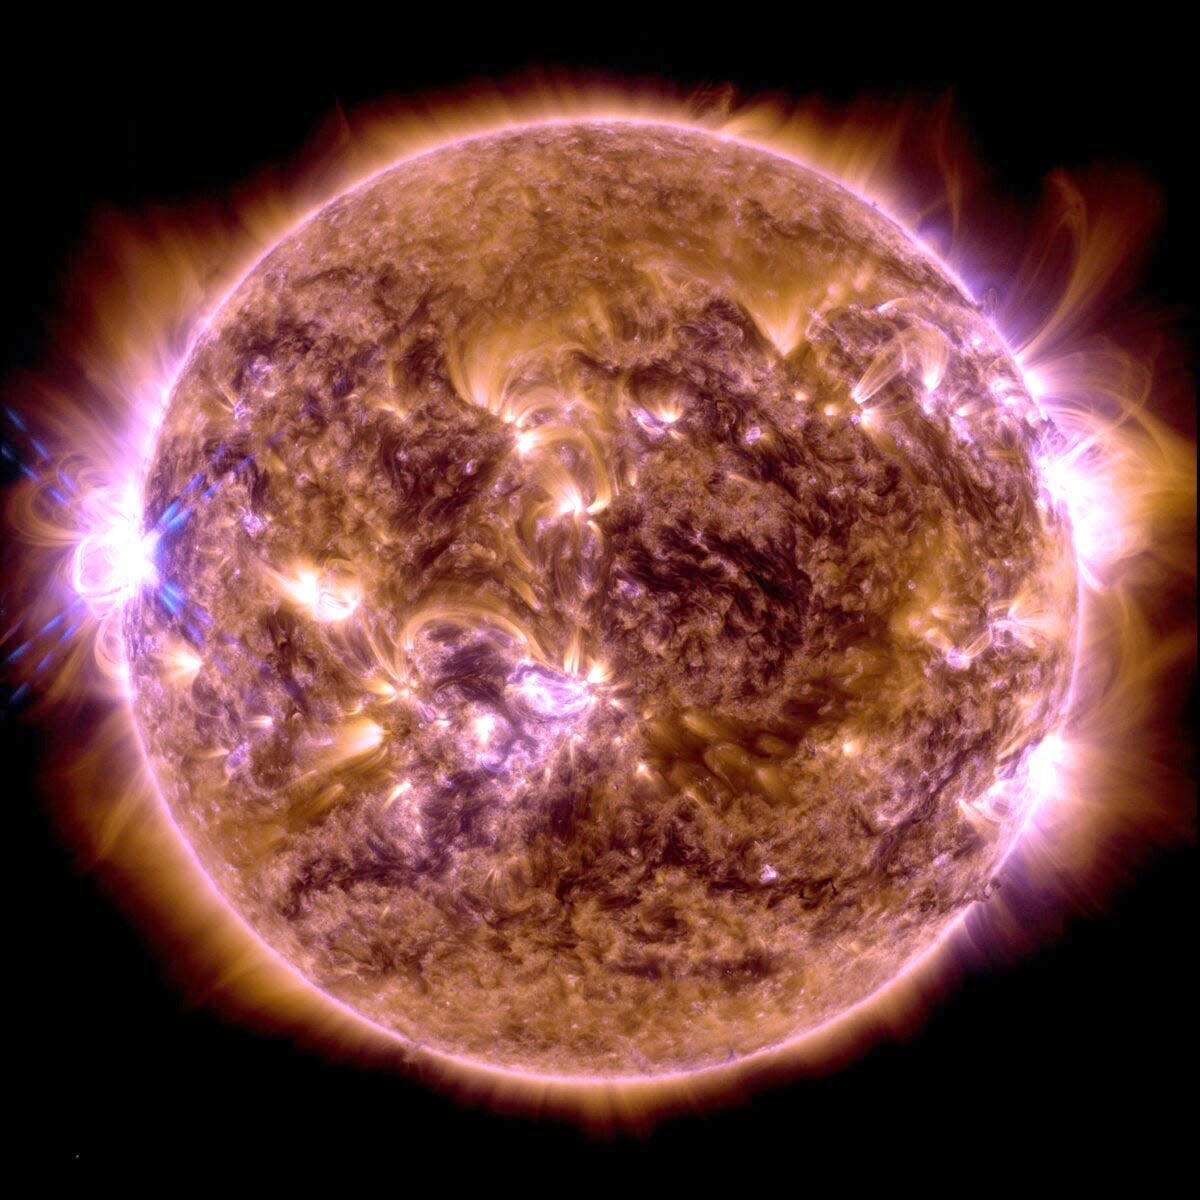 NASA’s Solar Dynamics Observatory captured this image of a solar flare on New Year's Eve. The image shows a subset of extreme ultraviolet light that highlights the extremely hot material in flares, which is colorized in yellow and orange.